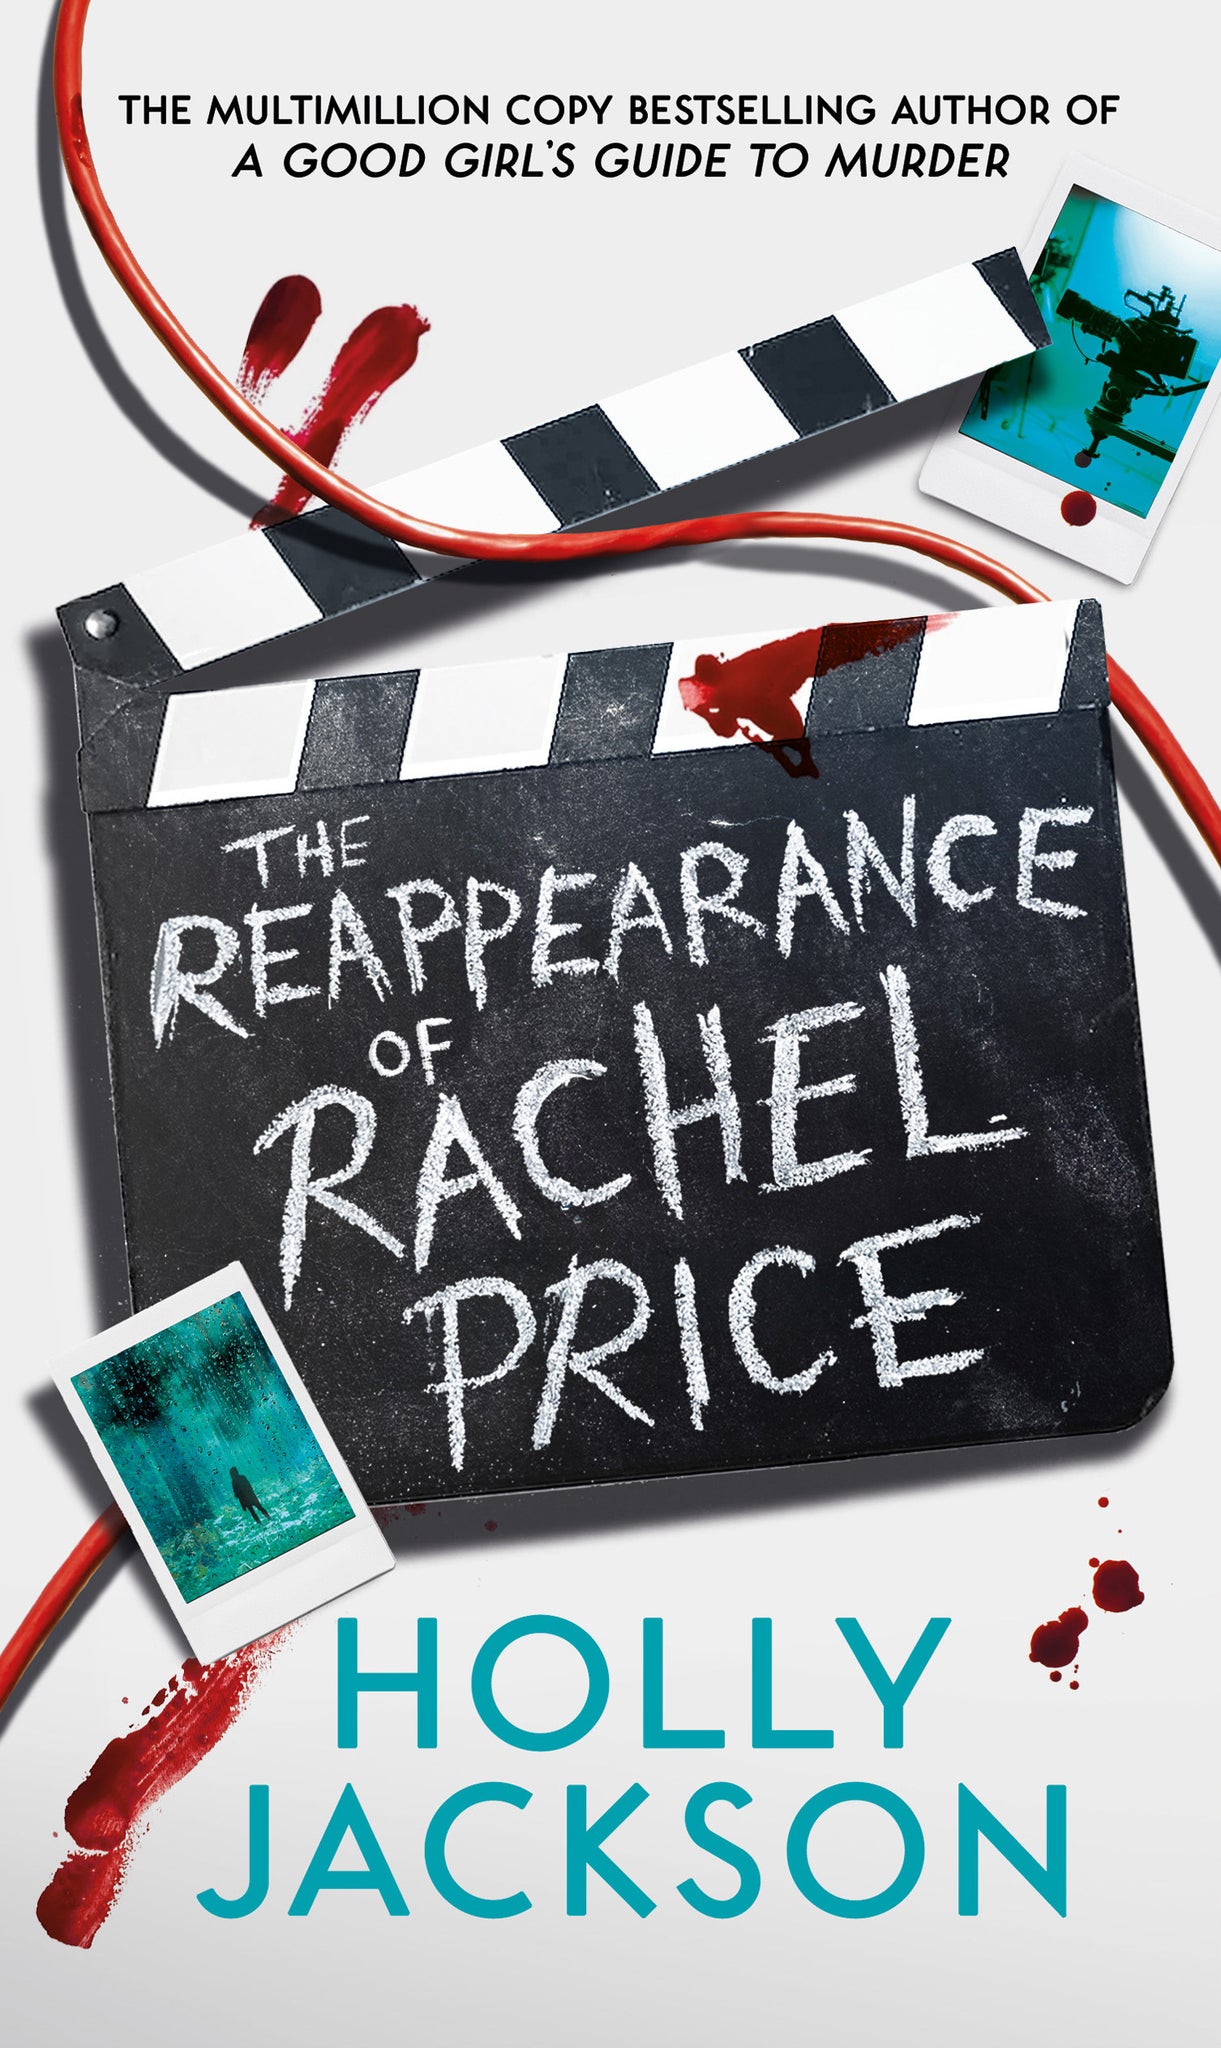 EVENT 09/05/24: Holly Jackson introduces The Reappearance of Rachel Price (with Crimefest)